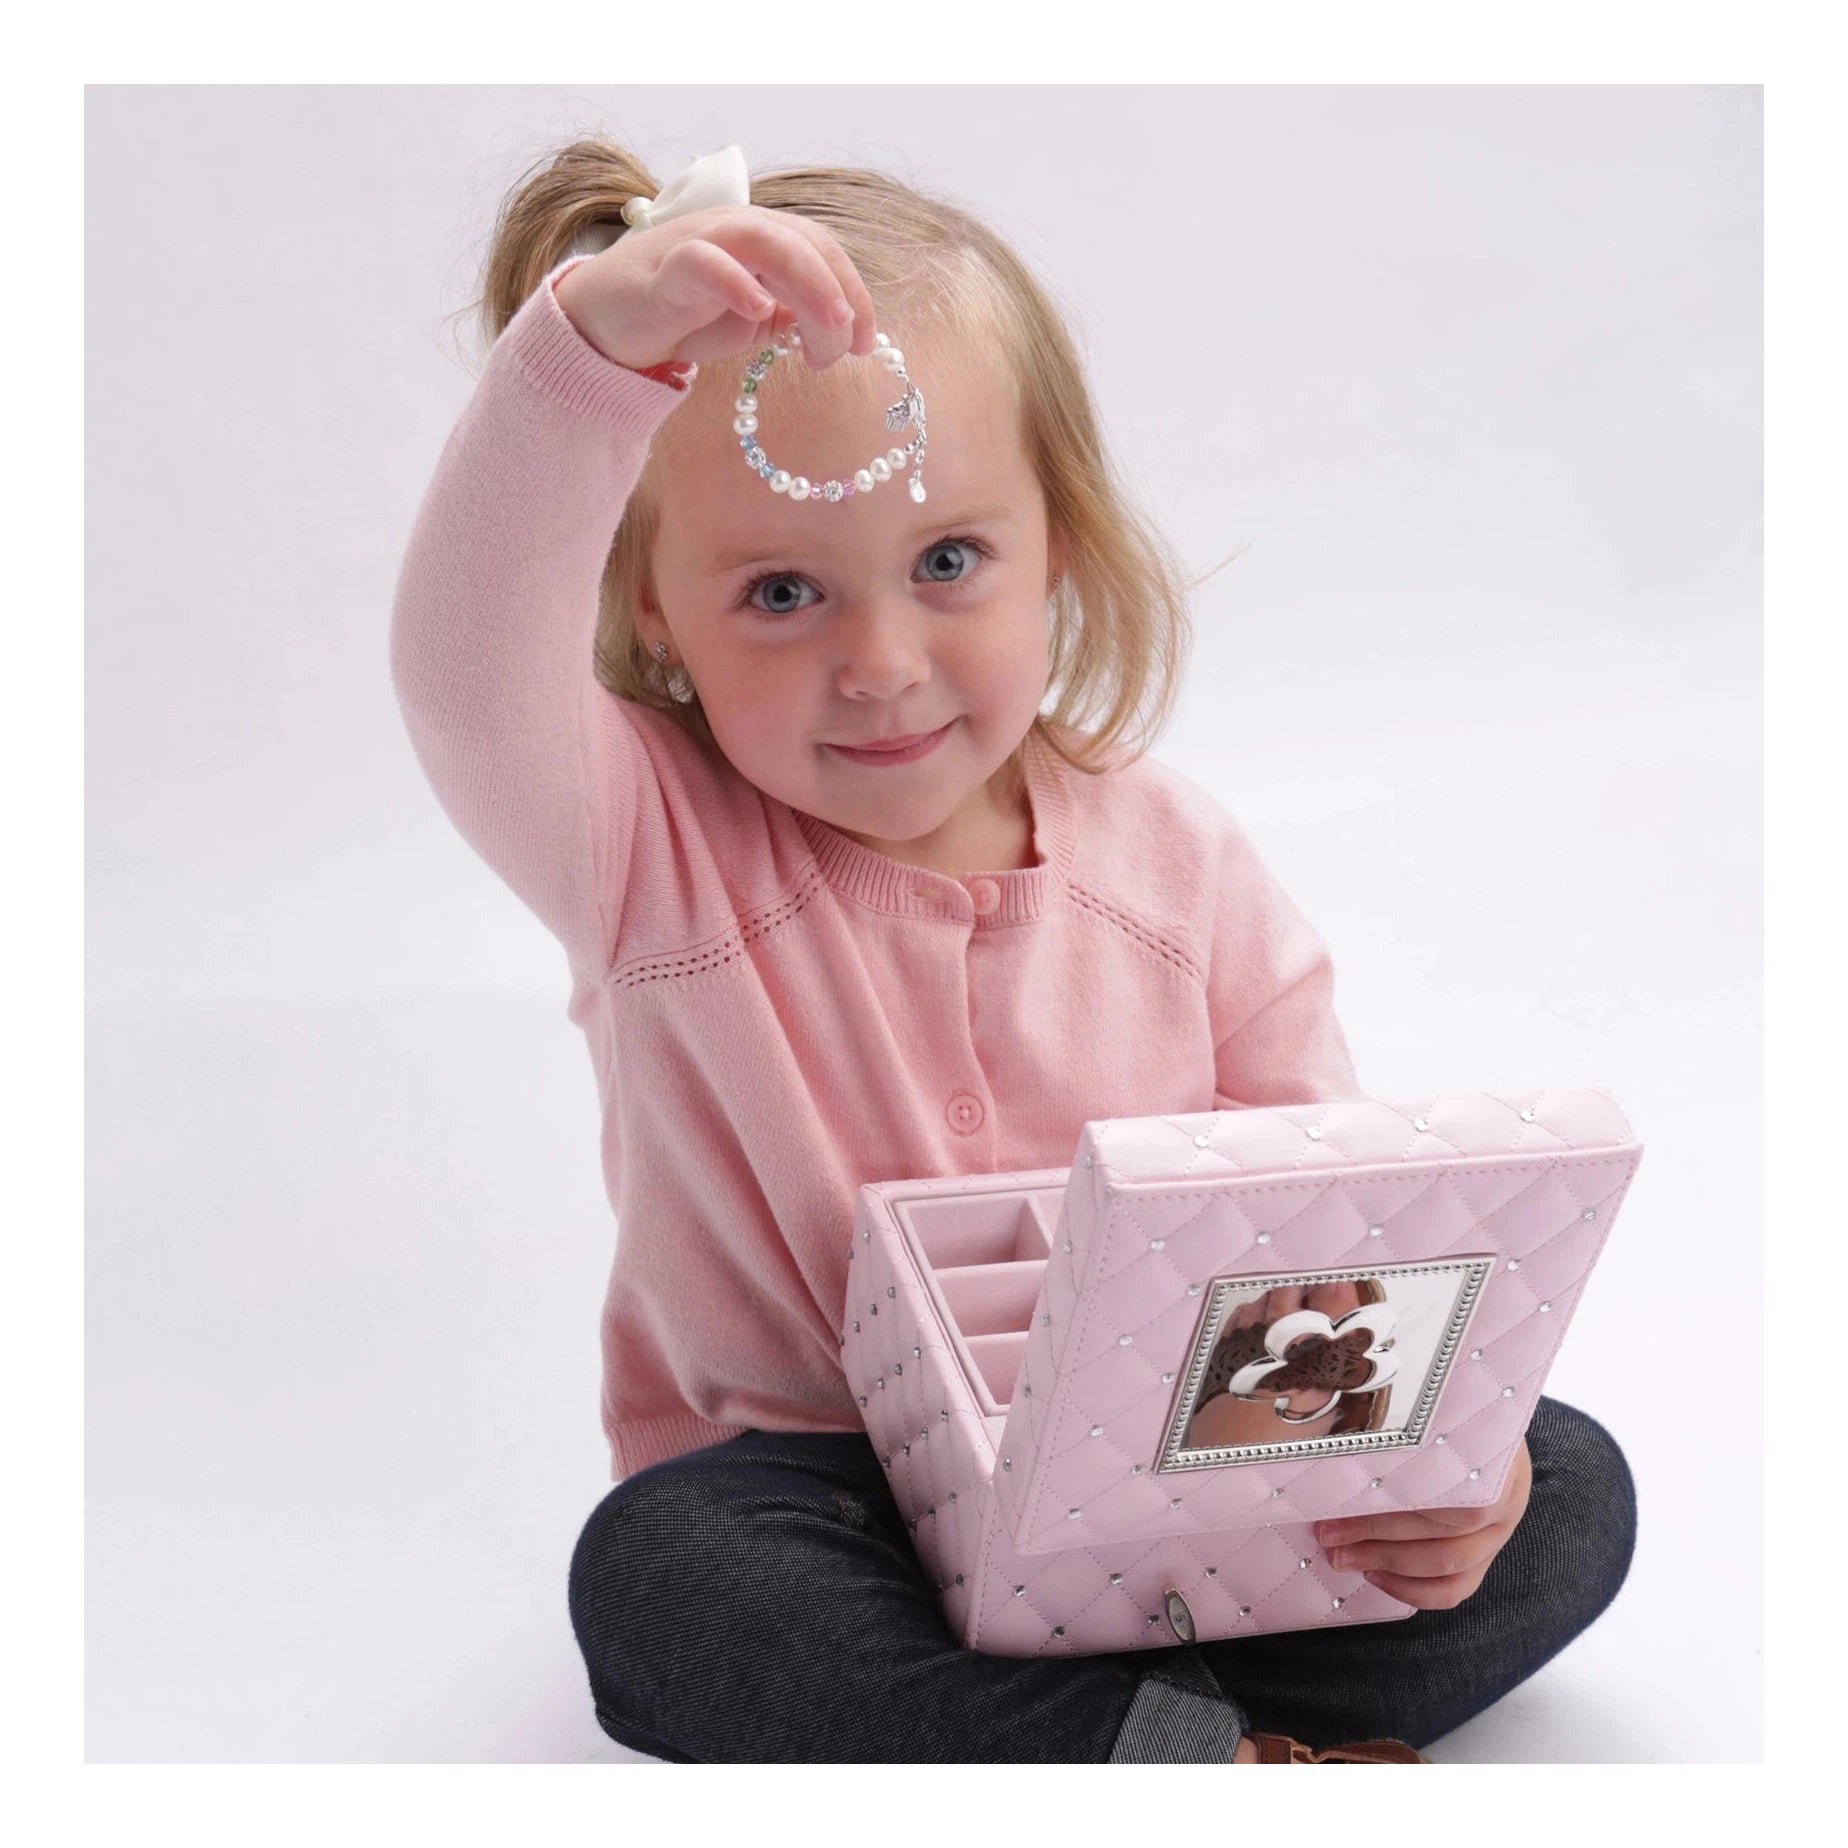 Pink Musical Jewelry Box & Heart Necklace